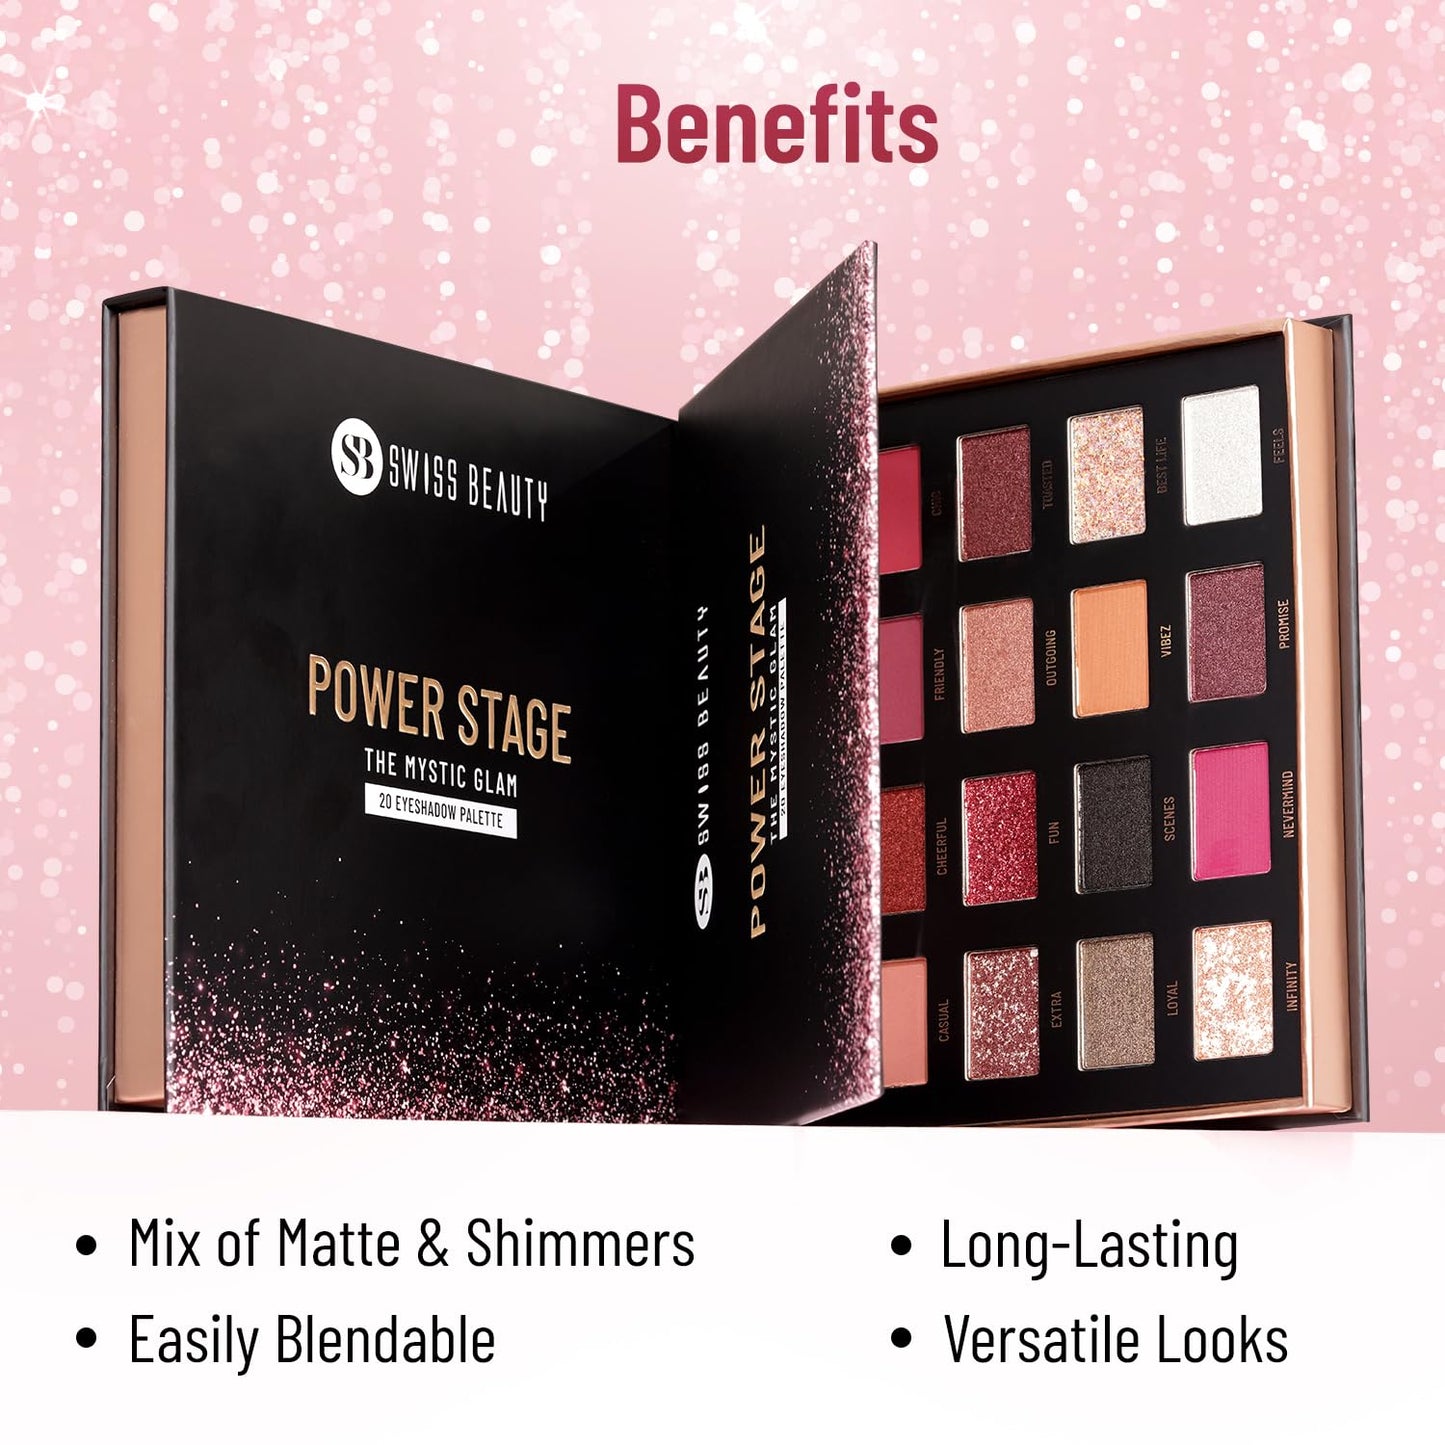 Swiss Beauty Power Stage Eyeshadow Palette with 20 pigmented shades | Blend of Matte and shimmers eye makeup palette | Shade- Mystic Glam, 25g